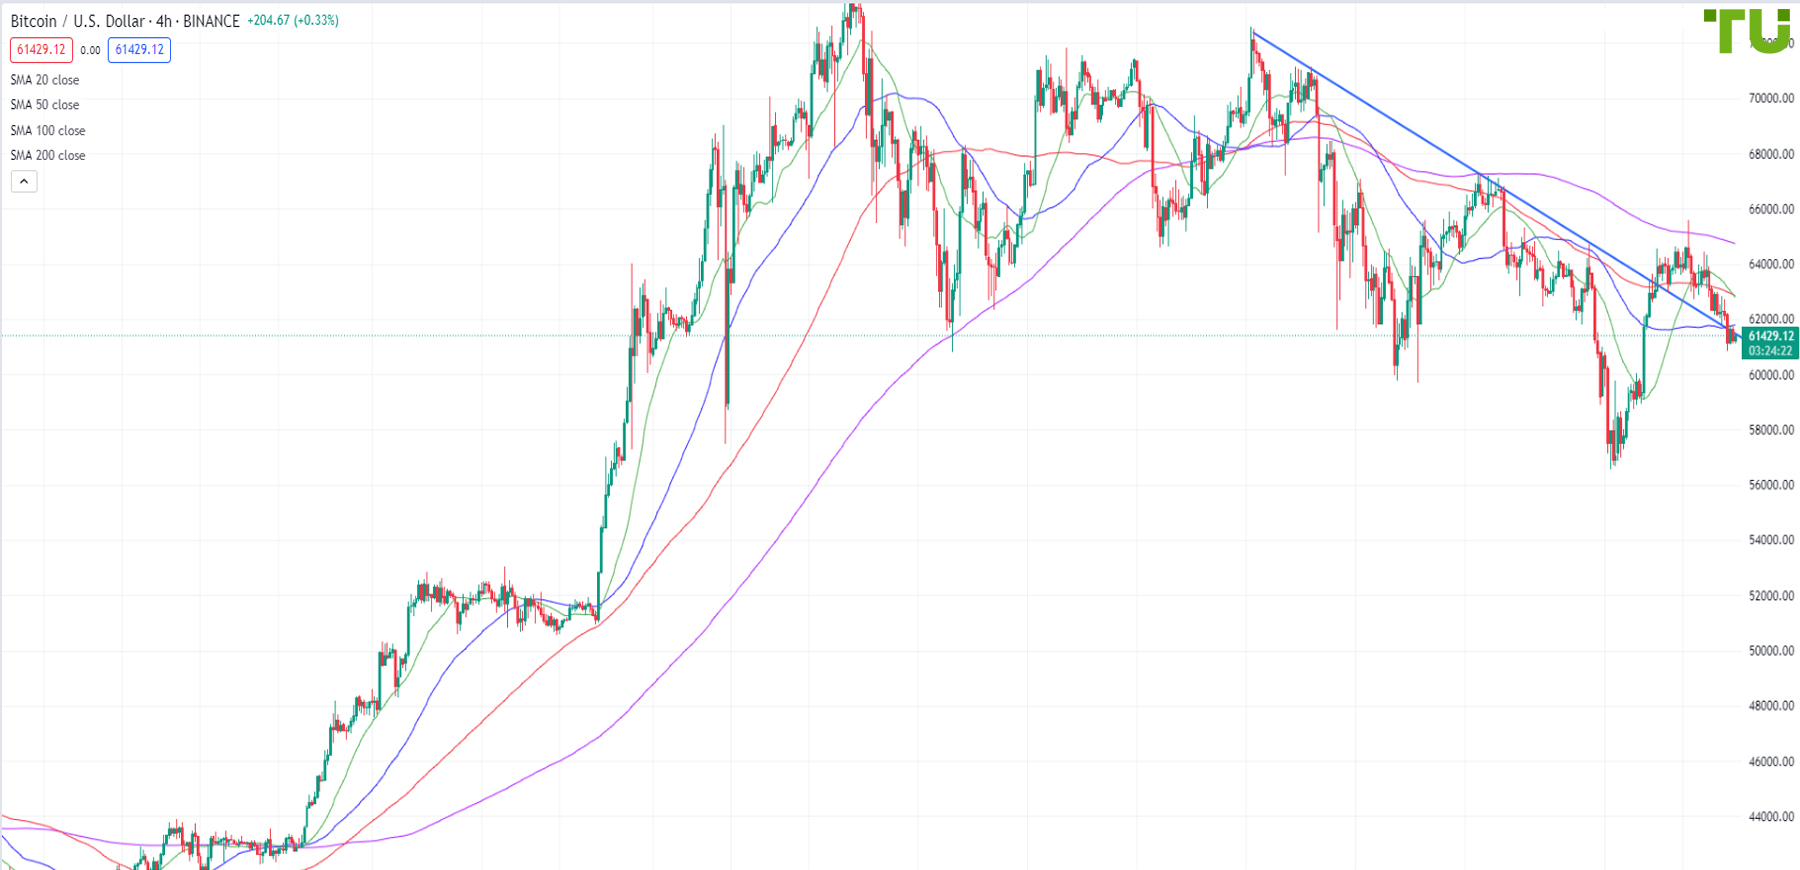 BTC/USD sold on the rise